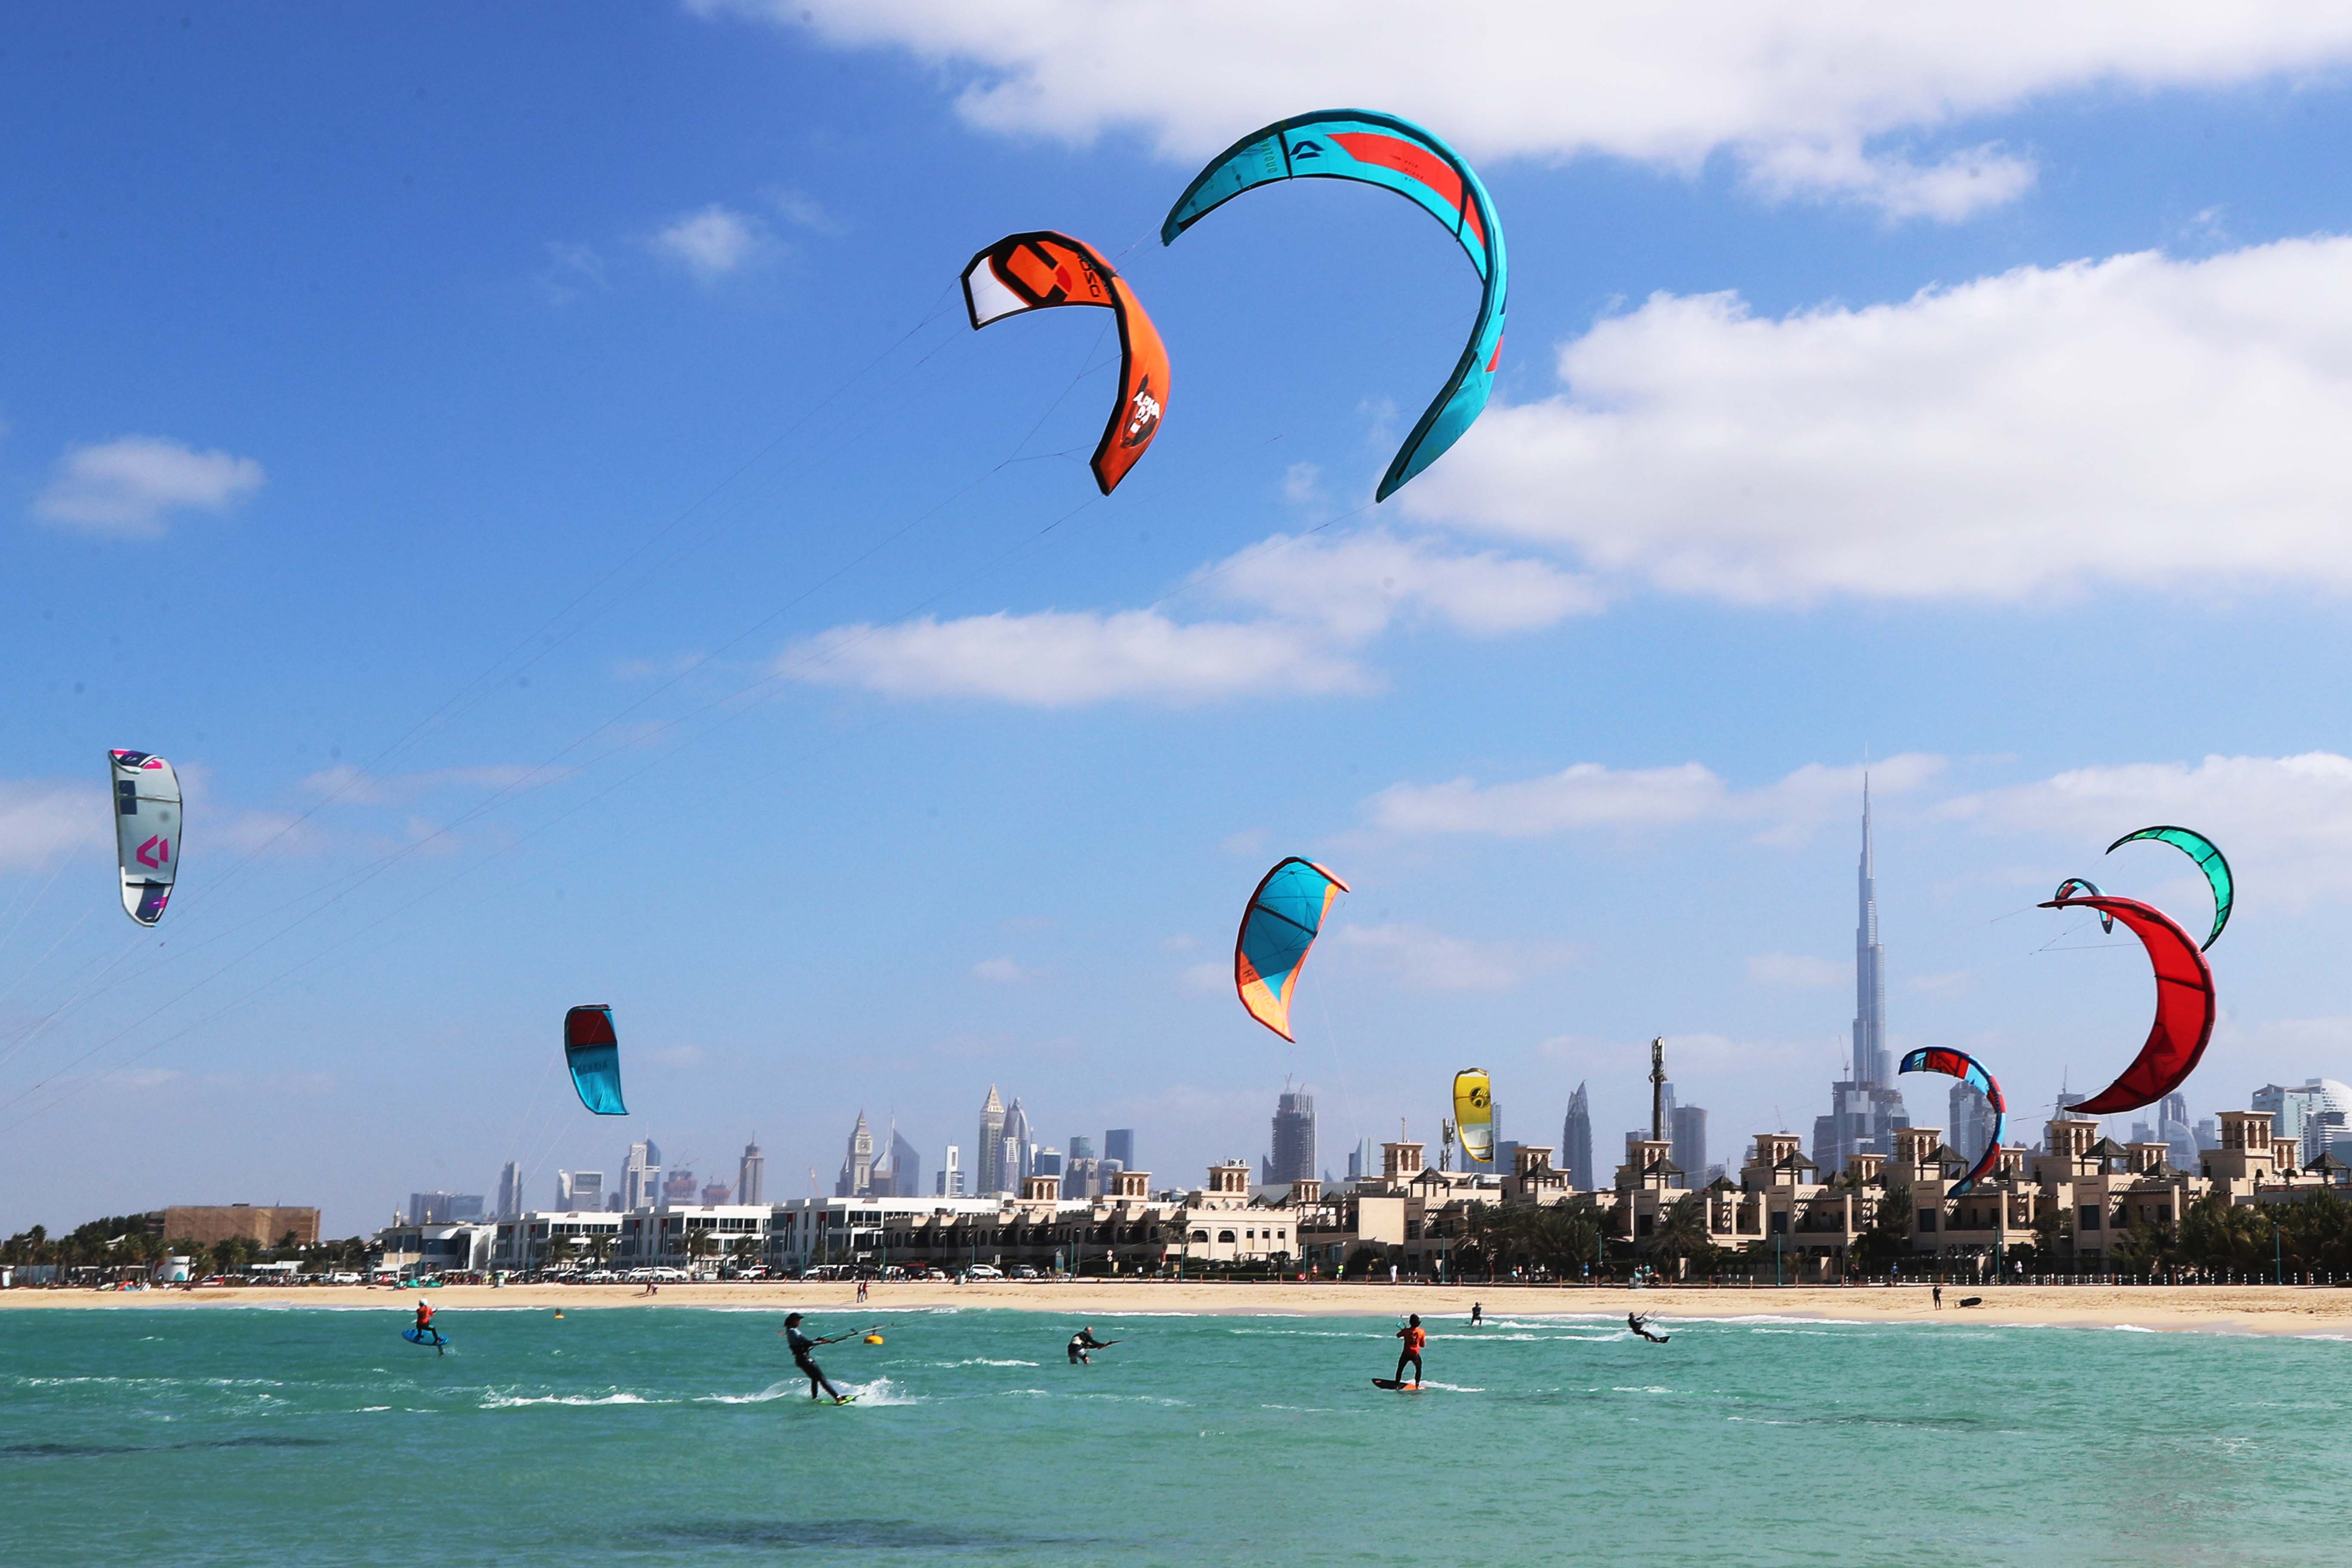 Hydrofoil Competition in Jumeirah Beach today until tomorrow